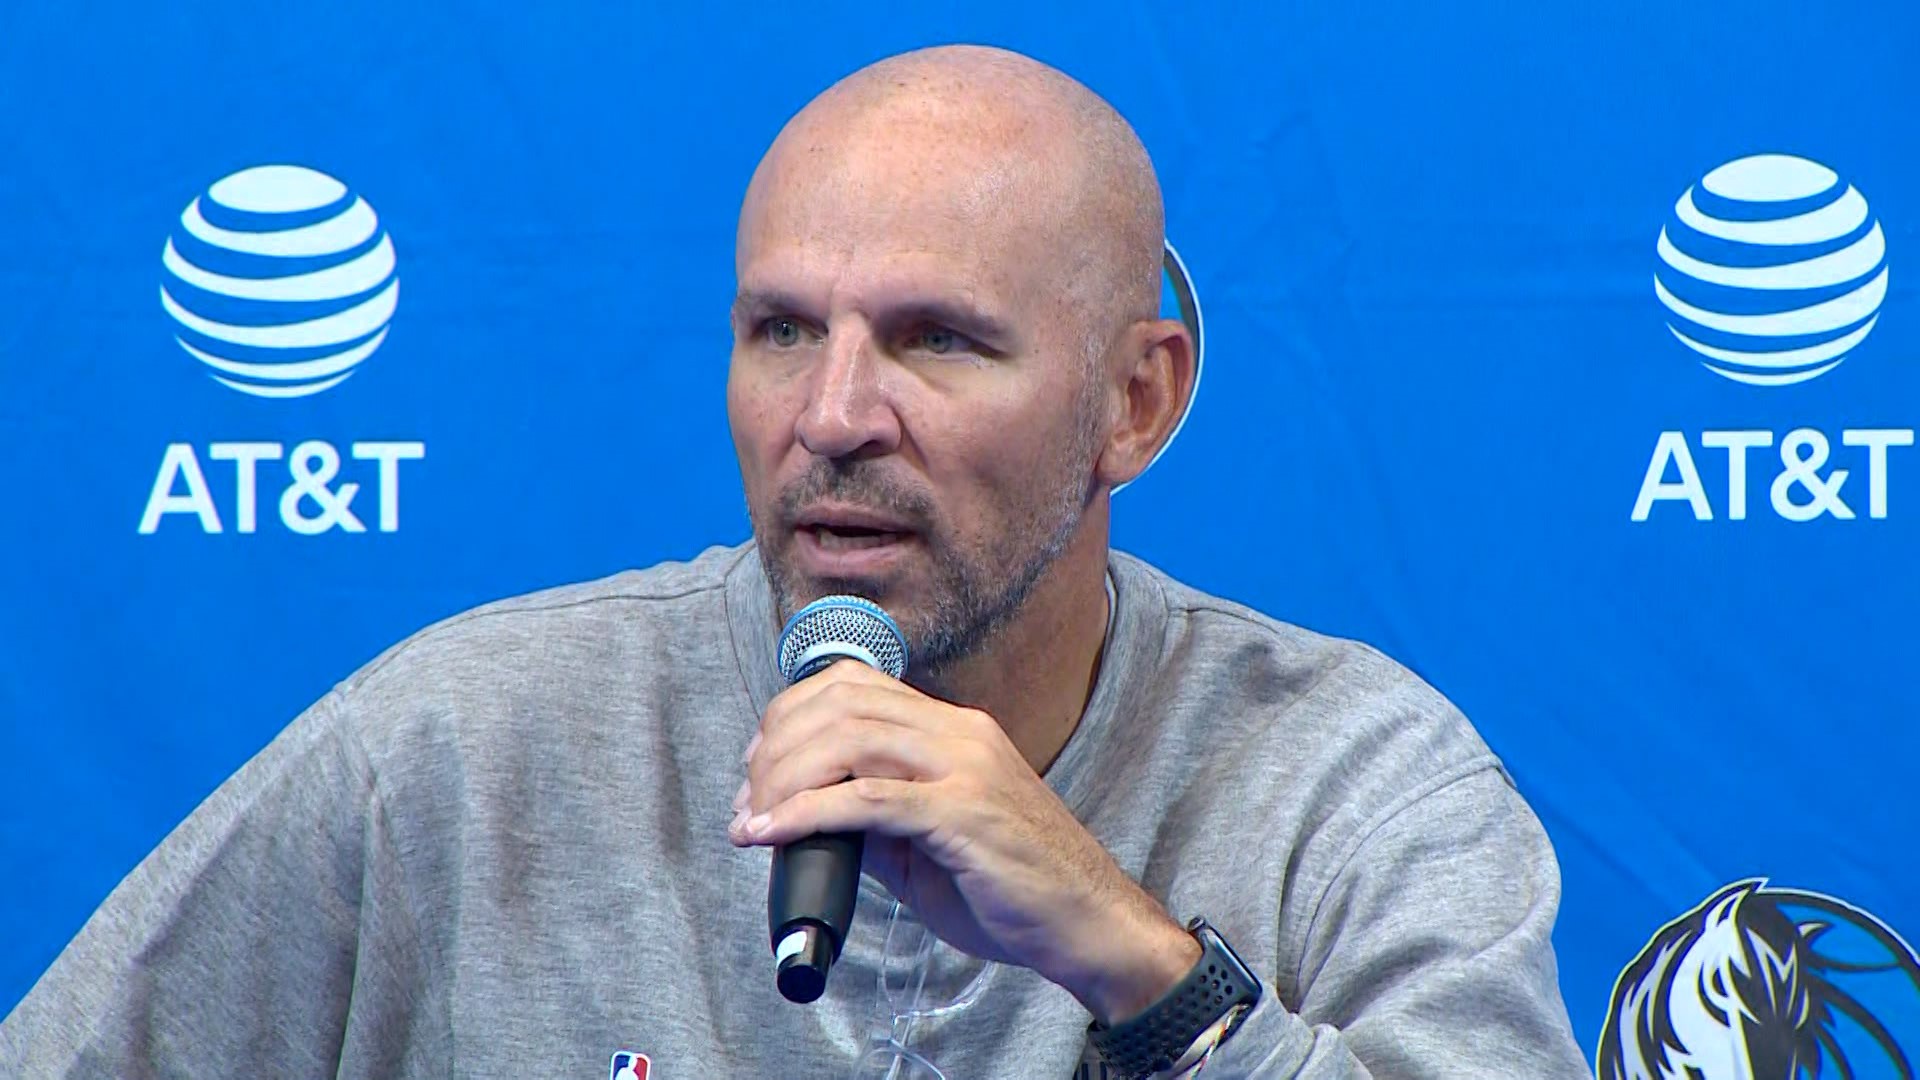 Dallas Mavericks head coach Jason Kidd spoke with the media on Thursday after practice about Luka Doncic's health and how the team is shaping out.